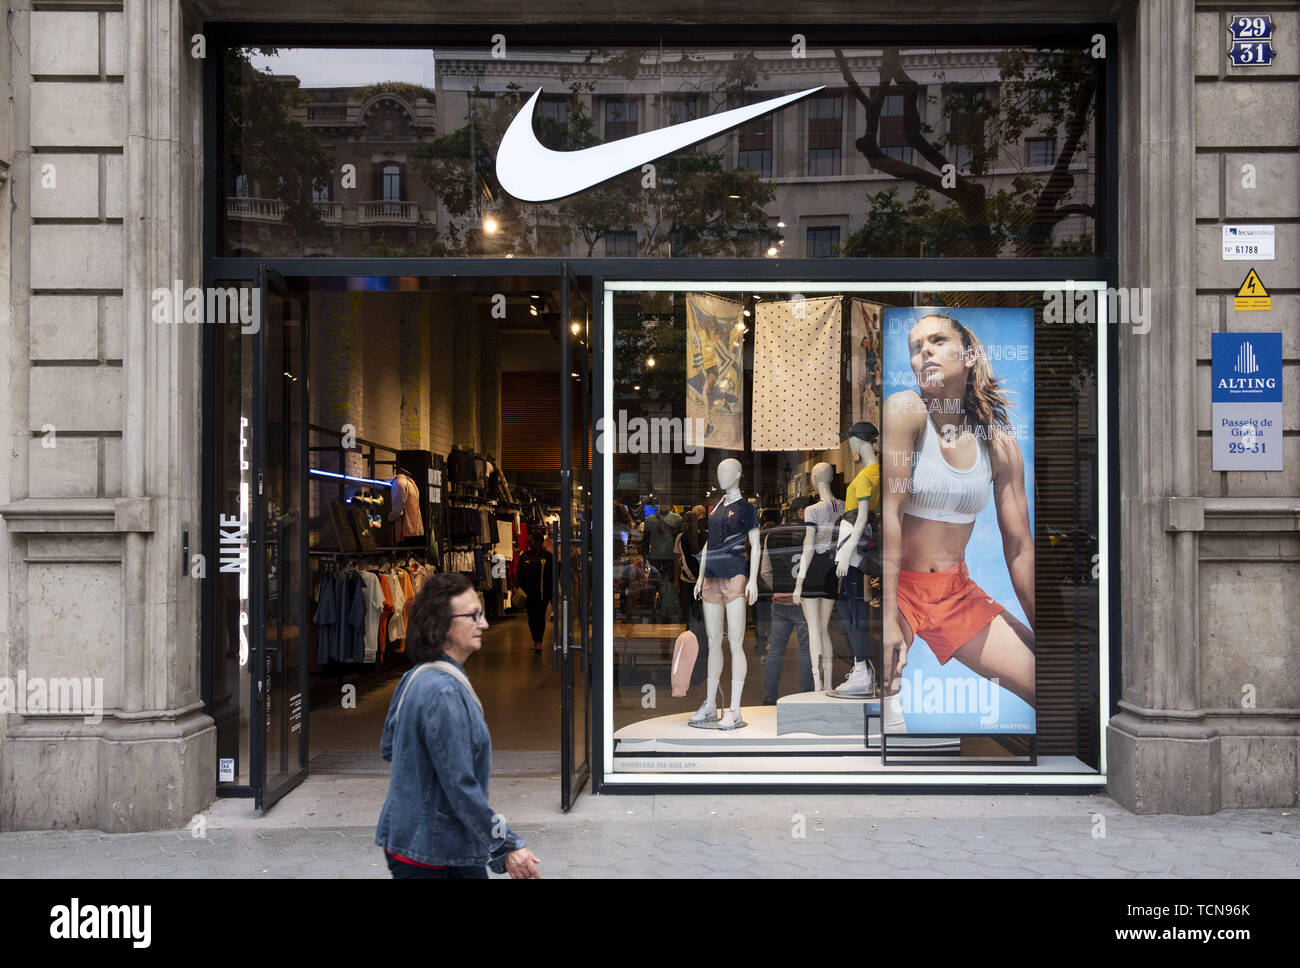 Barcelona, Spain. 29th May, 2019. American multinational clothing corporation Nike store in Barcelona. Credit: Miguel Candela/SOPA Images/ZUMA Wire/Alamy Live News - Alamy